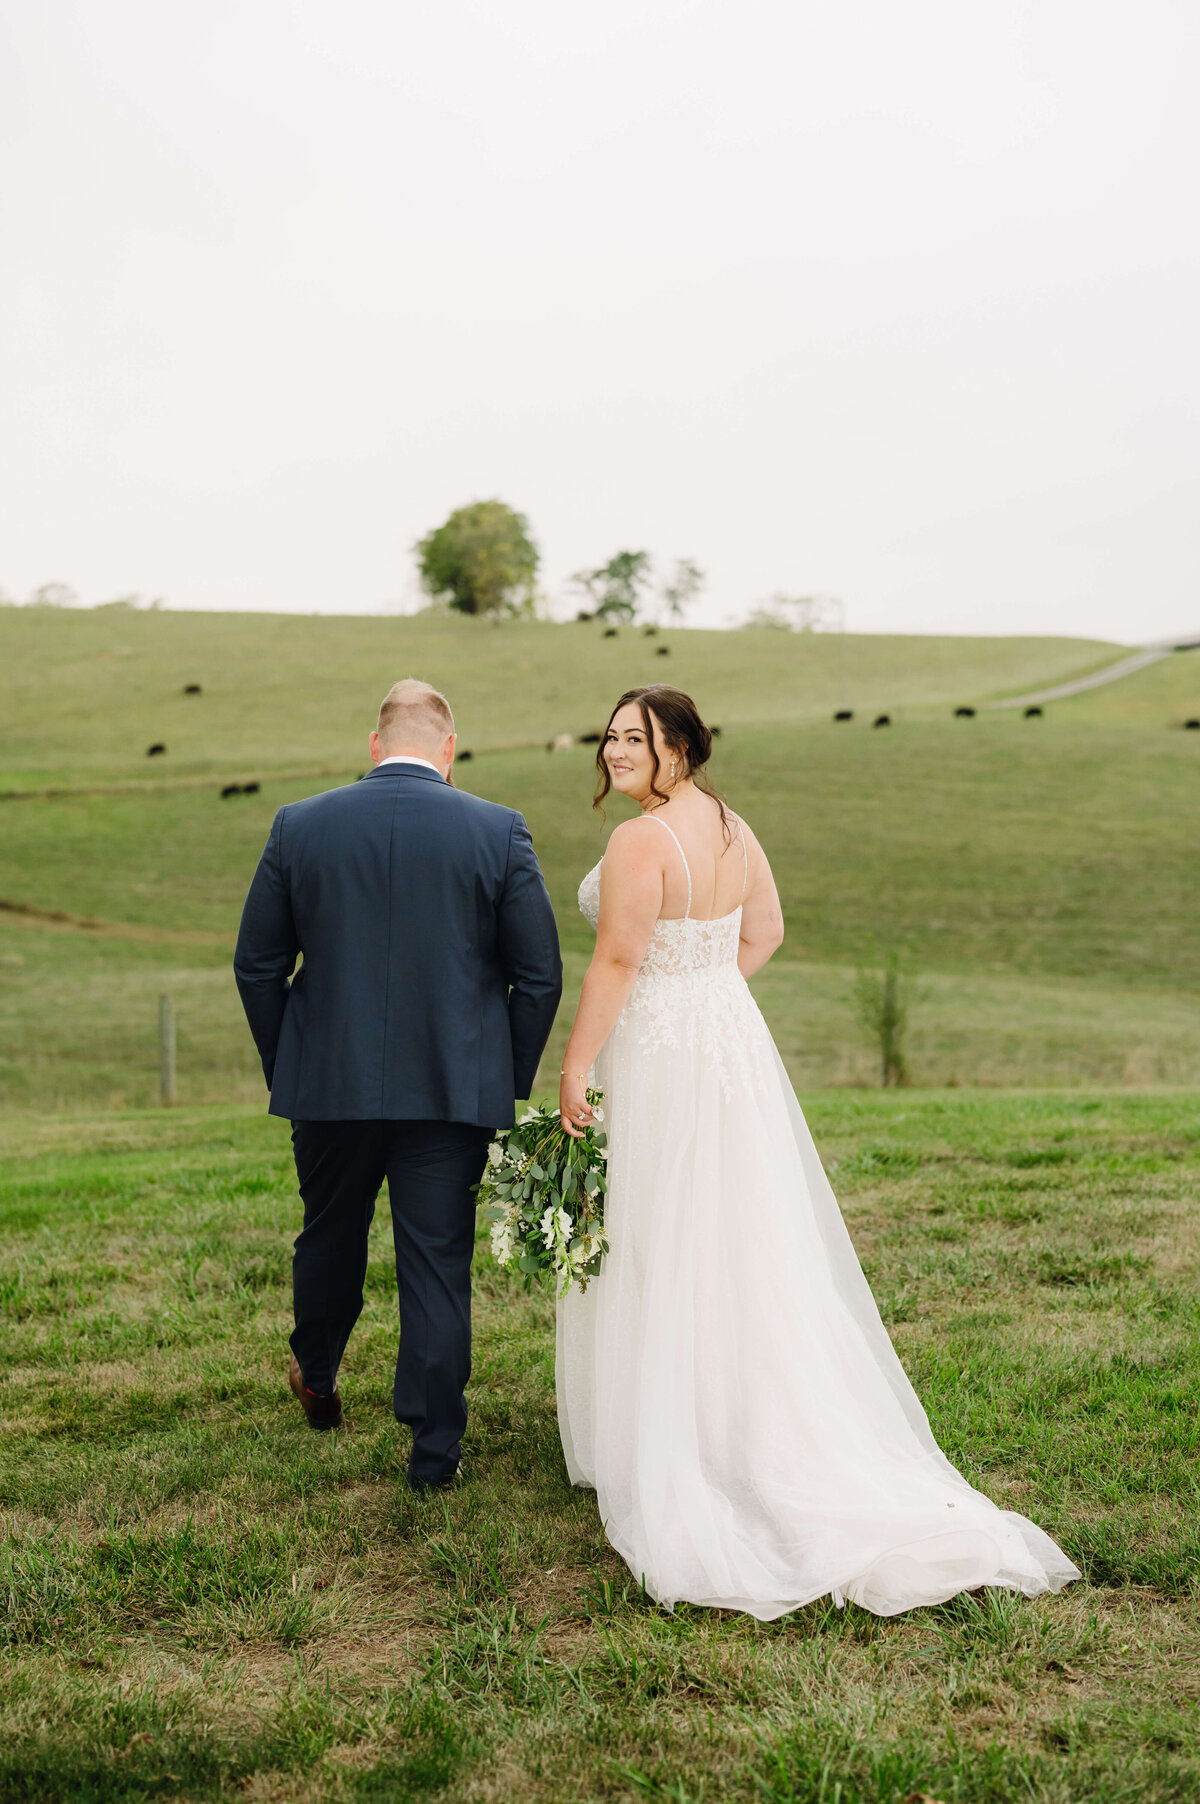 Charlottesville wedding photographer captures candid picture of bride and groom walking towards a field of cattle at Sunny Slope farm with the bride smiling over her shoulder